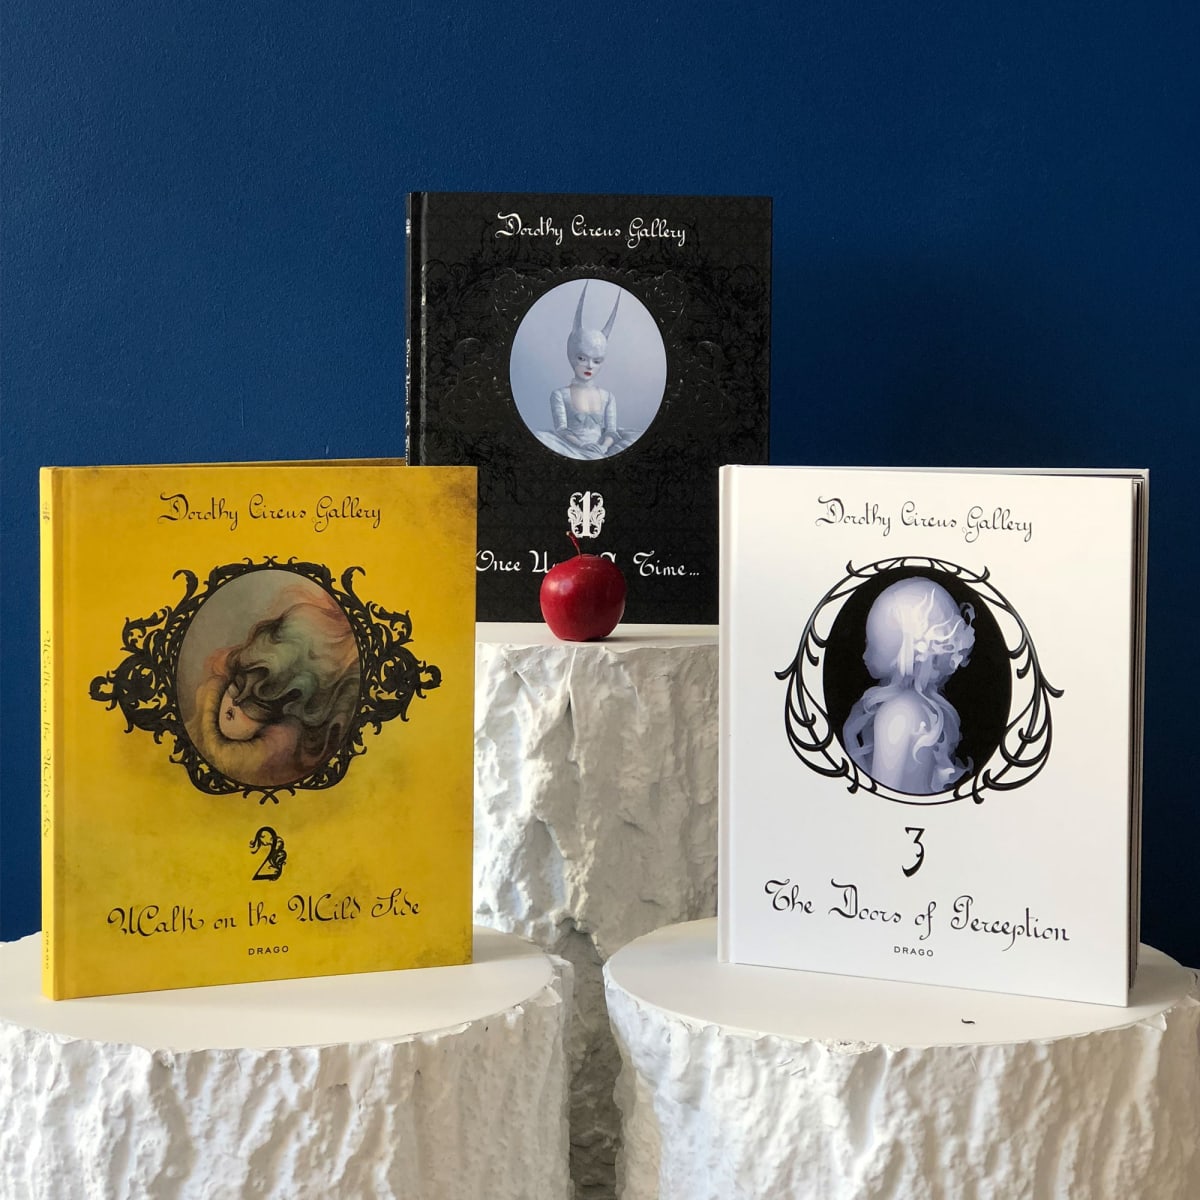 Trilogy Art catalogues published by Dorothy Circus Factory showing on the cover artworks by Miss Van, Ray Caesar and Kazuki Takamatsu